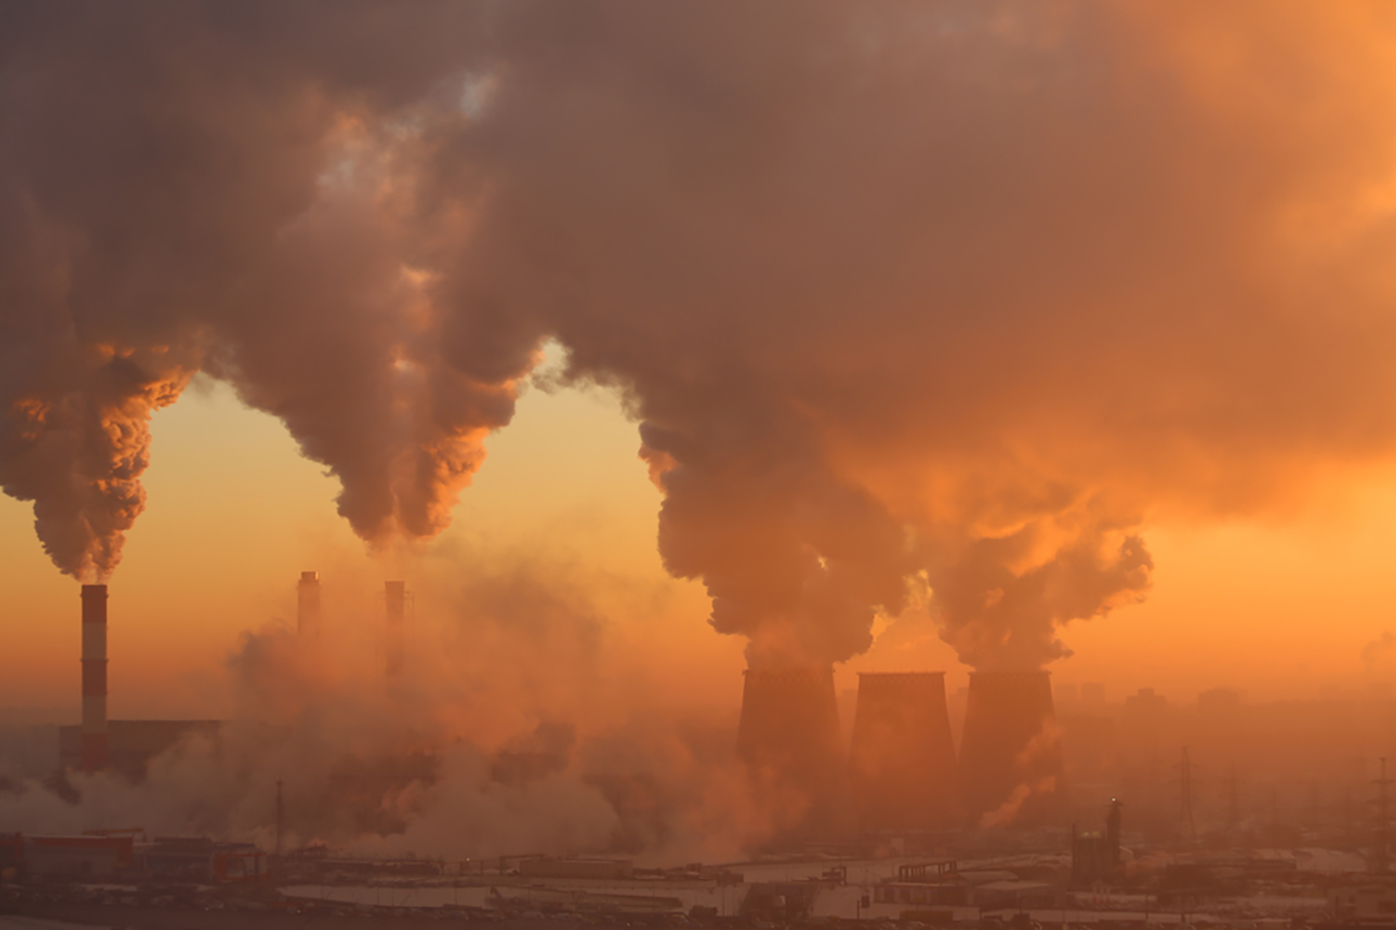 Climate change and pollution